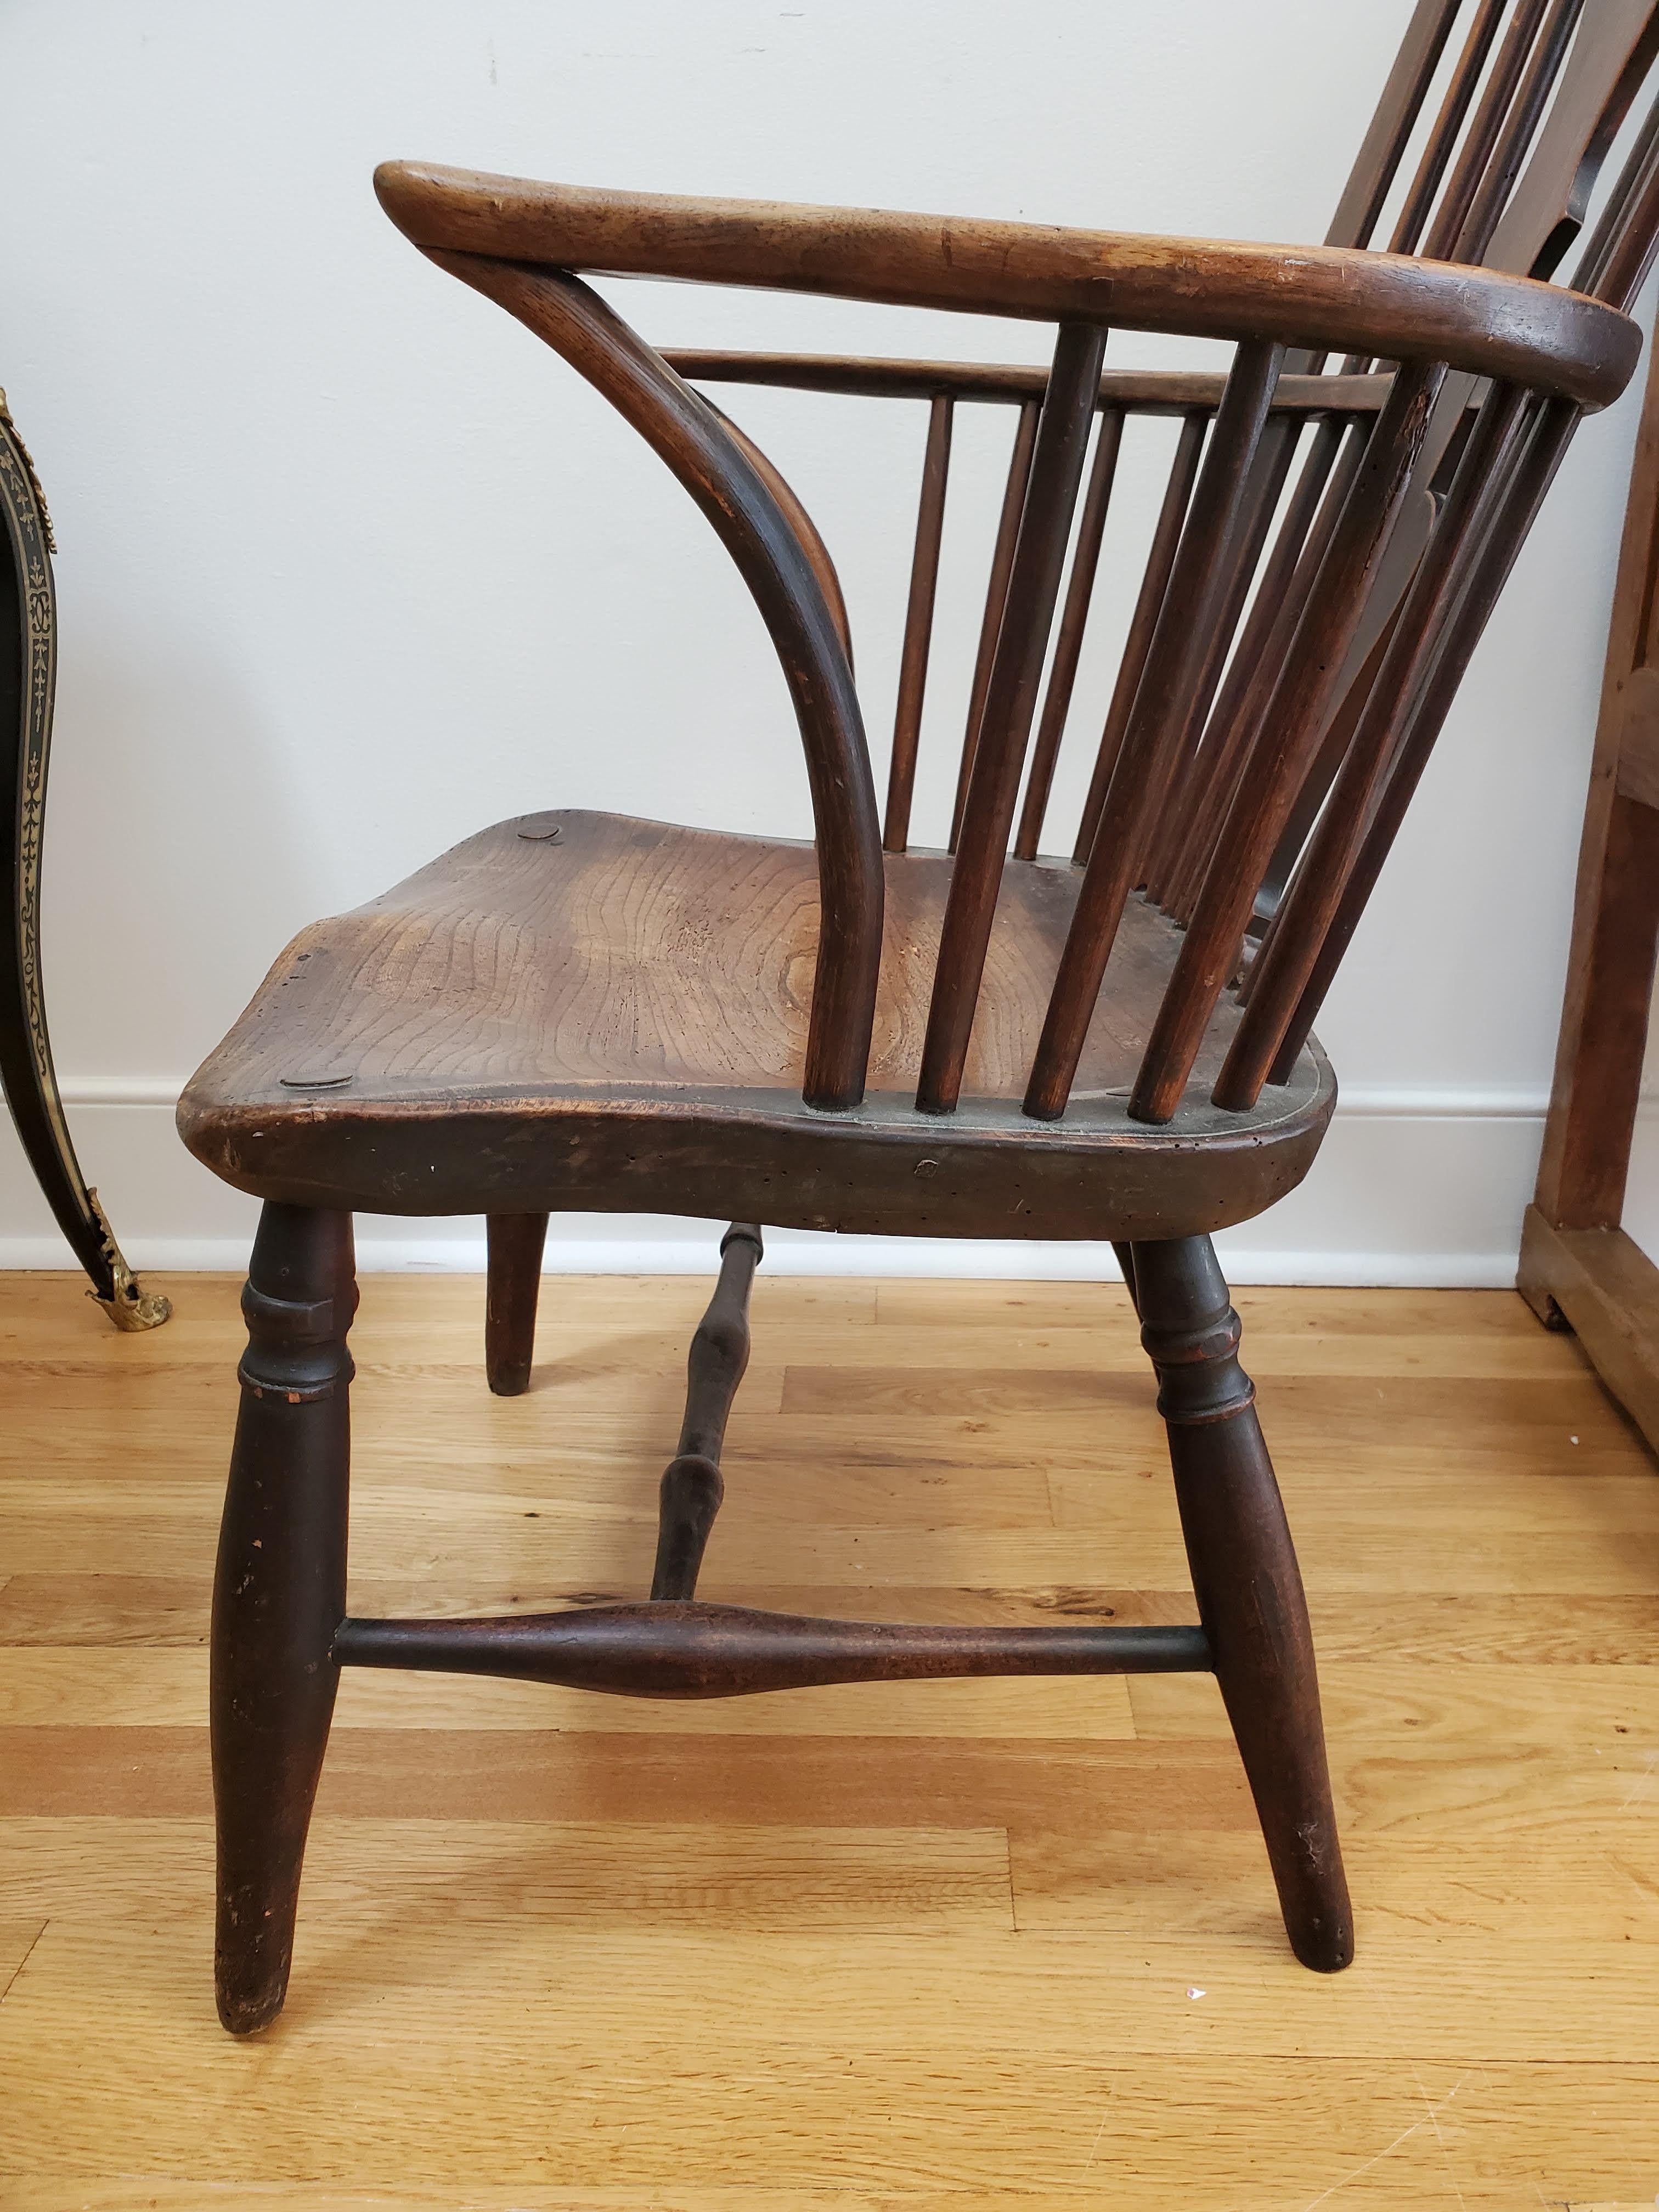 Small 18th Century English Comb Back Windsor Armchair Made of Elm, Ash & Walnut In Good Condition For Sale In Middleburg, VA